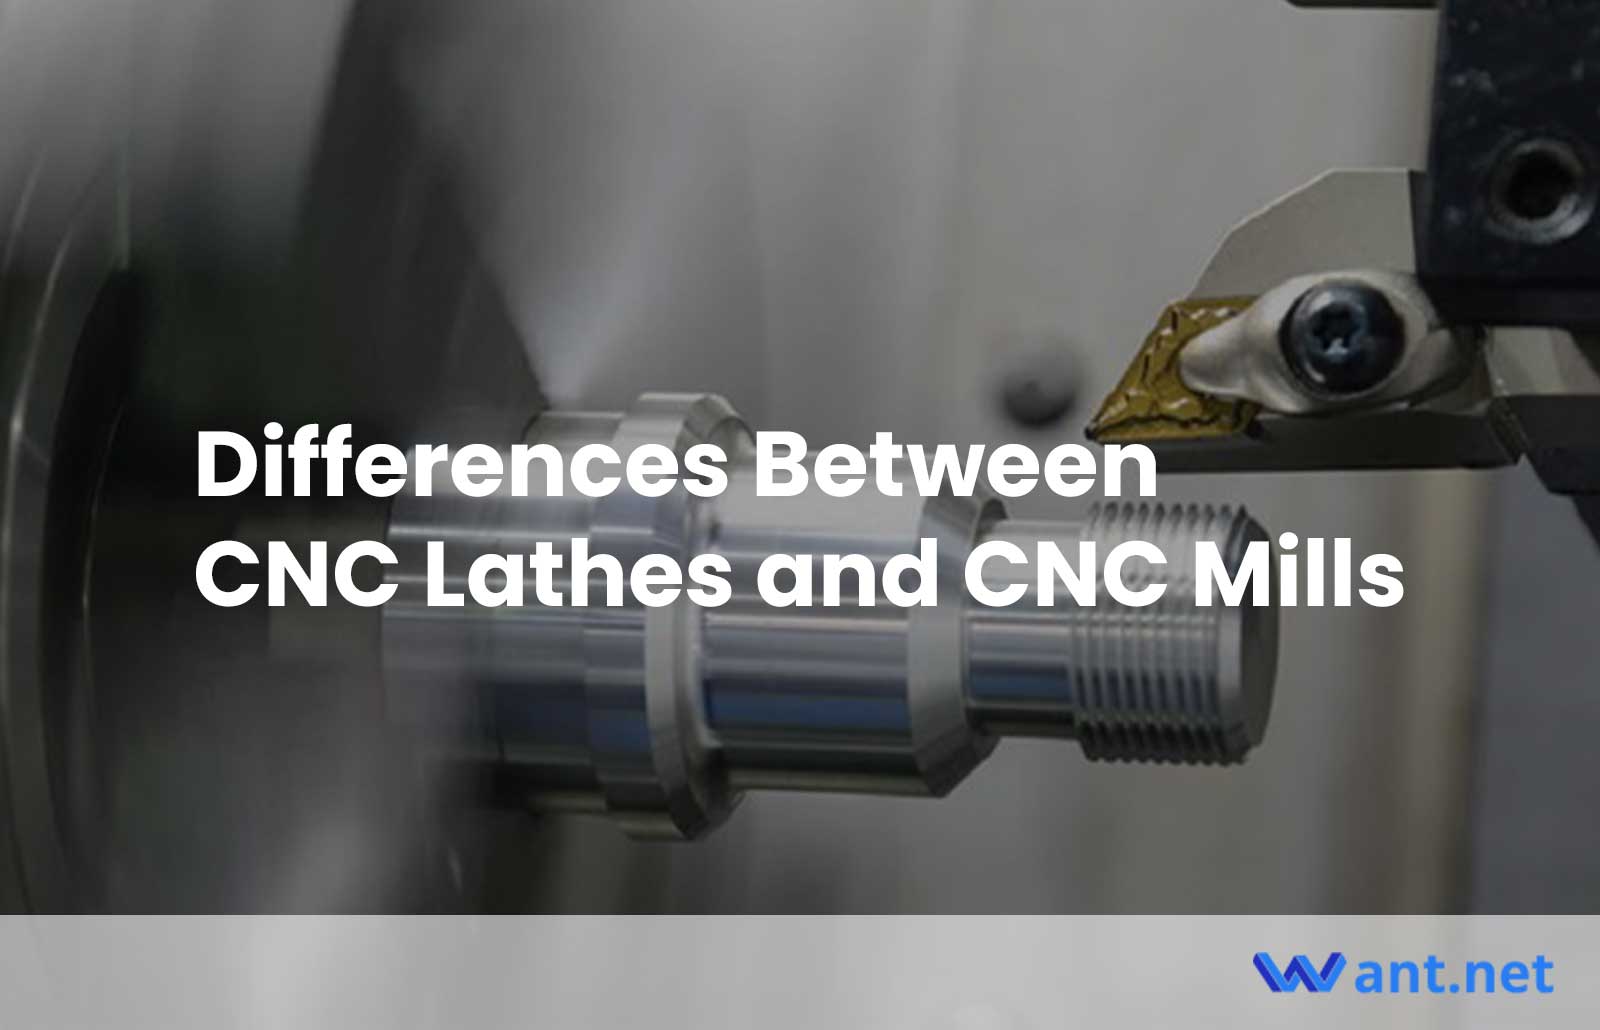 Differences Between CNC Lathes and CNC Mills